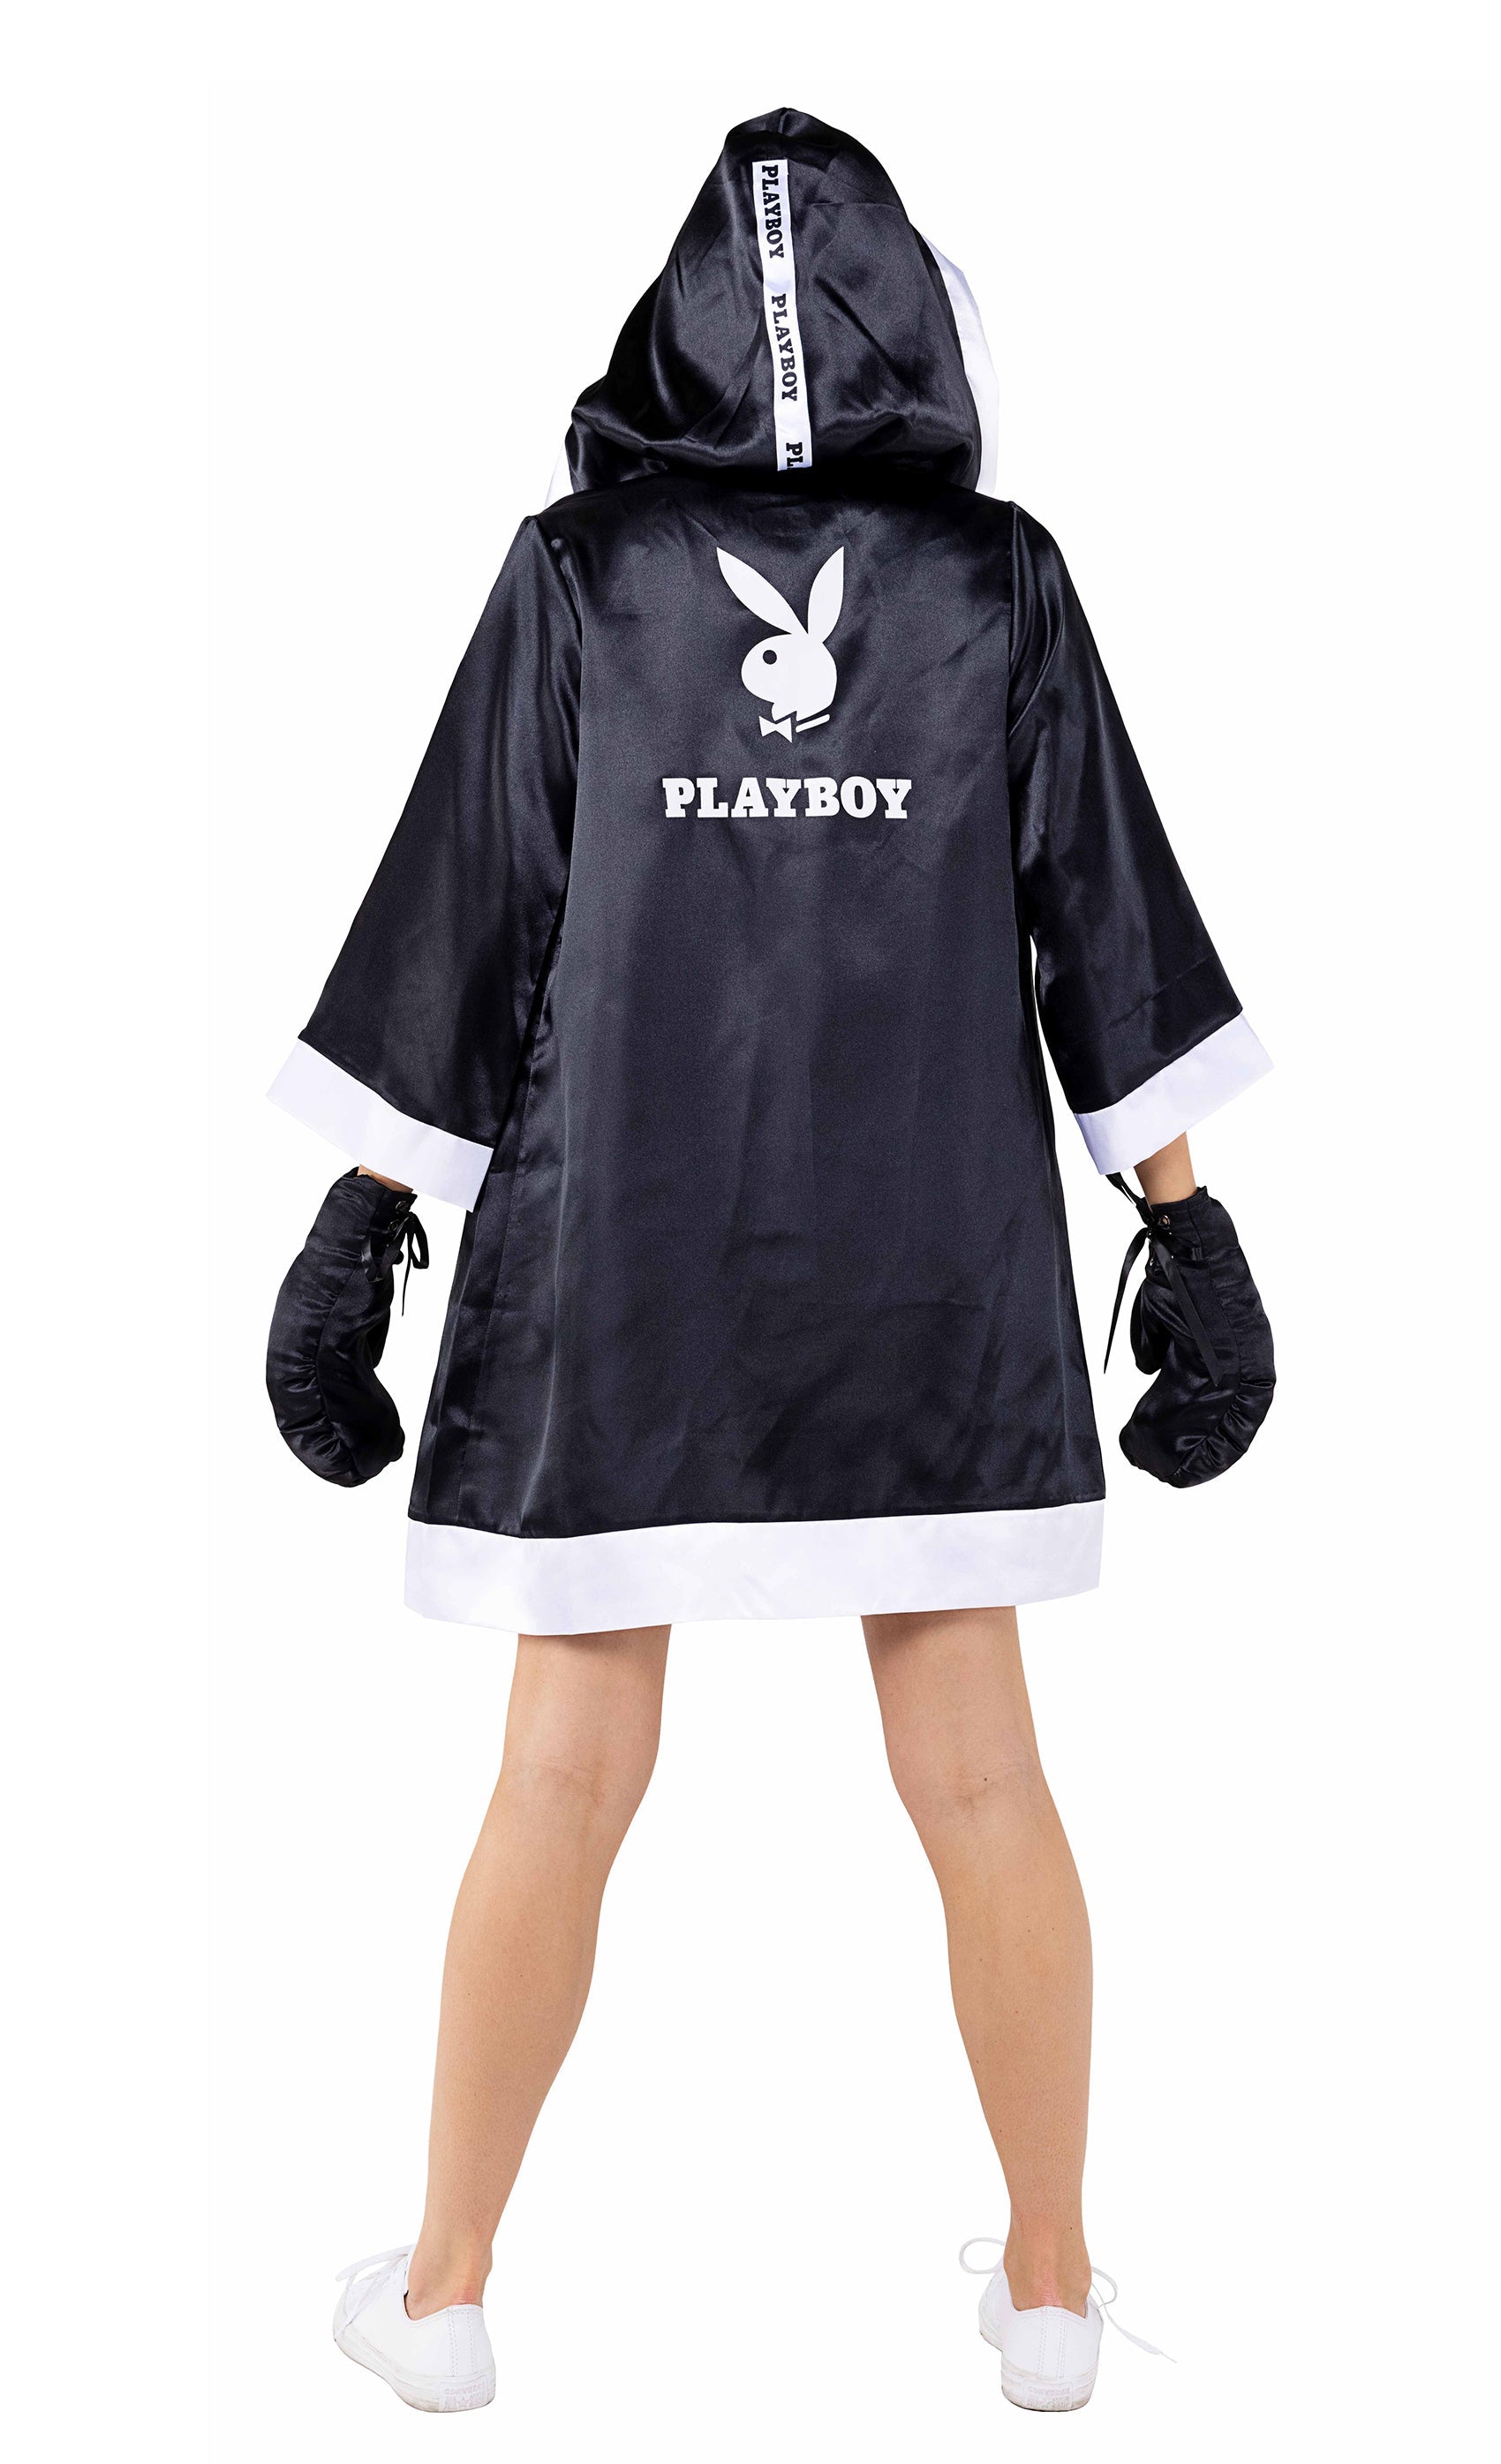 Roma Costume 5pc Playboy Knock-Out Boxer